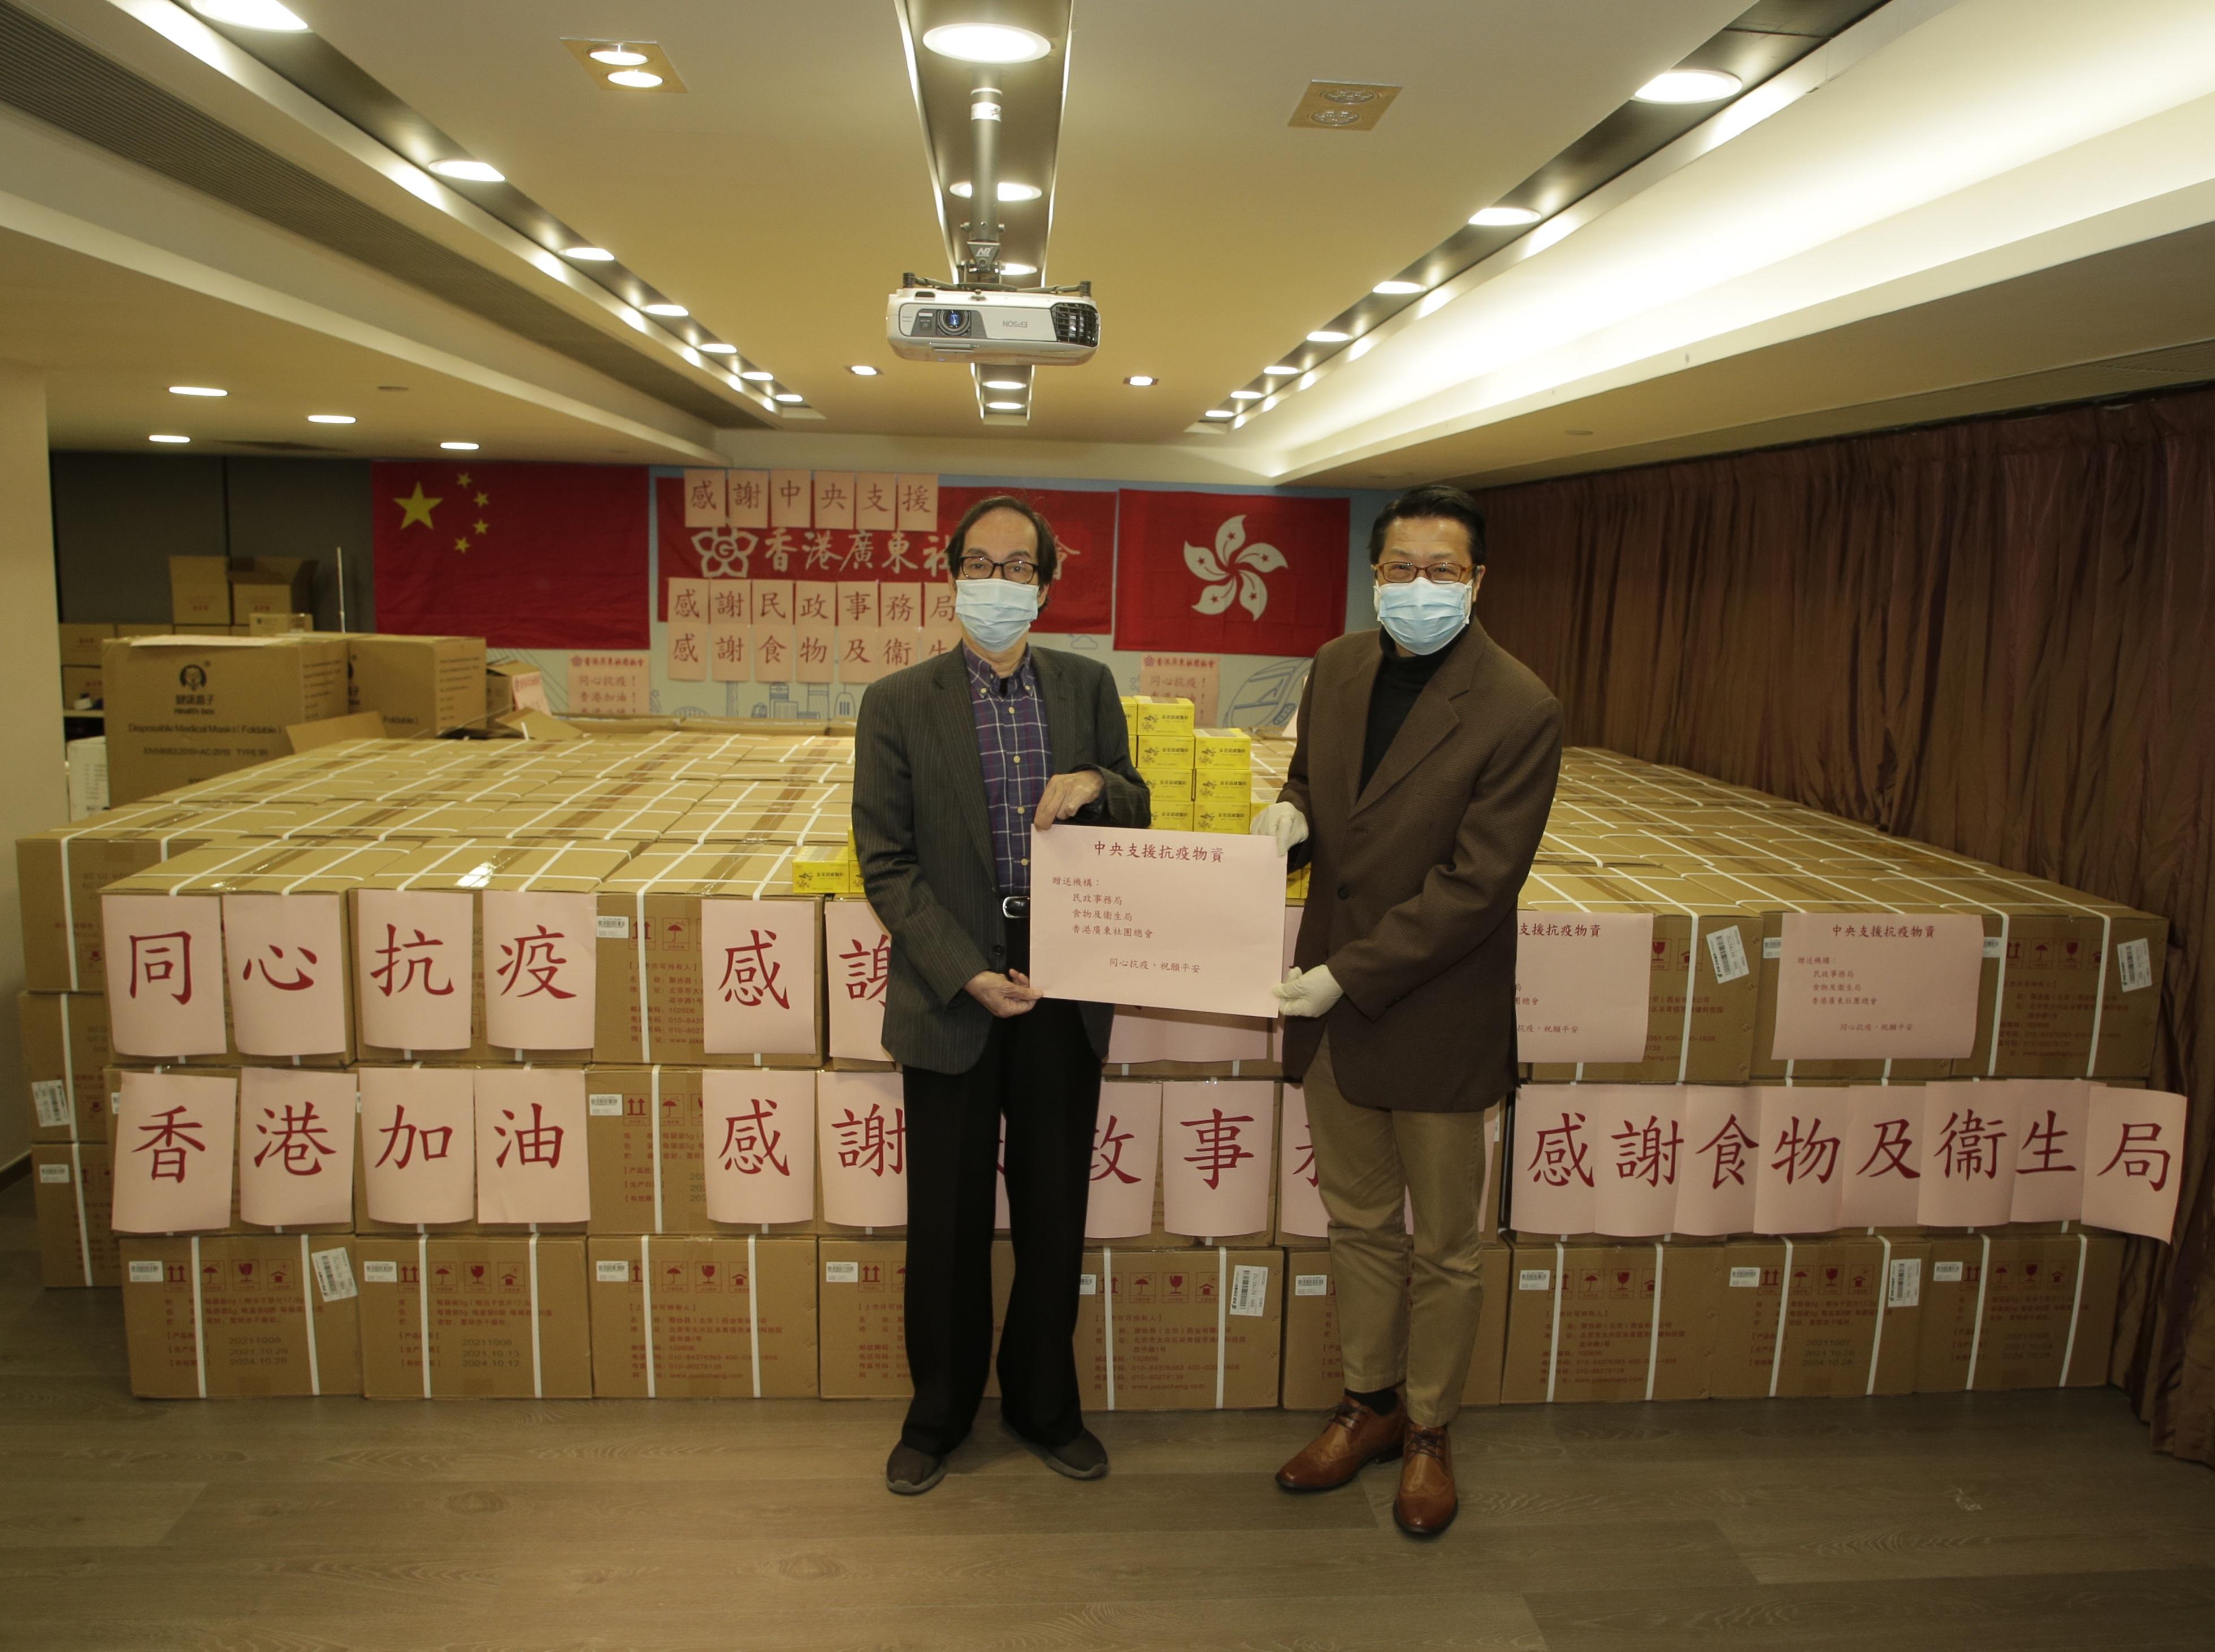 The Acting Secretary for Home Affairs, Mr Jack Chan, today (February 26) joined major organisations separately to distribute anti-epidemic supplies in several districts. Photo shows Mr Chan (right) presenting 50 000 boxes of  "Jinhua Qinggan Keli" donated by the Central Government to the Federation of Hong Kong Guangdong Community Organisations for further distribution to people in need.